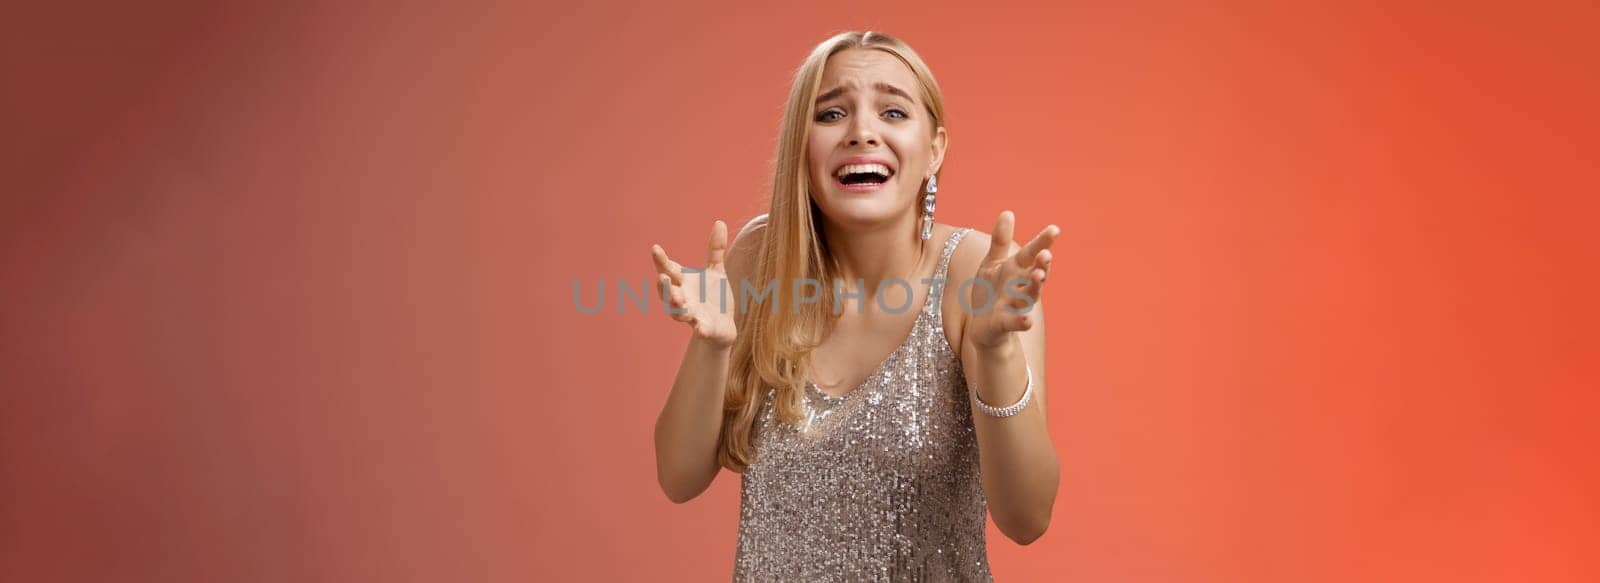 Lifestyle. Panicking upset miserable heartbroken blond girl crying raising hands begging not go broke-up boyfriend look sorrow distressed freak-out standing devastated red background during party.